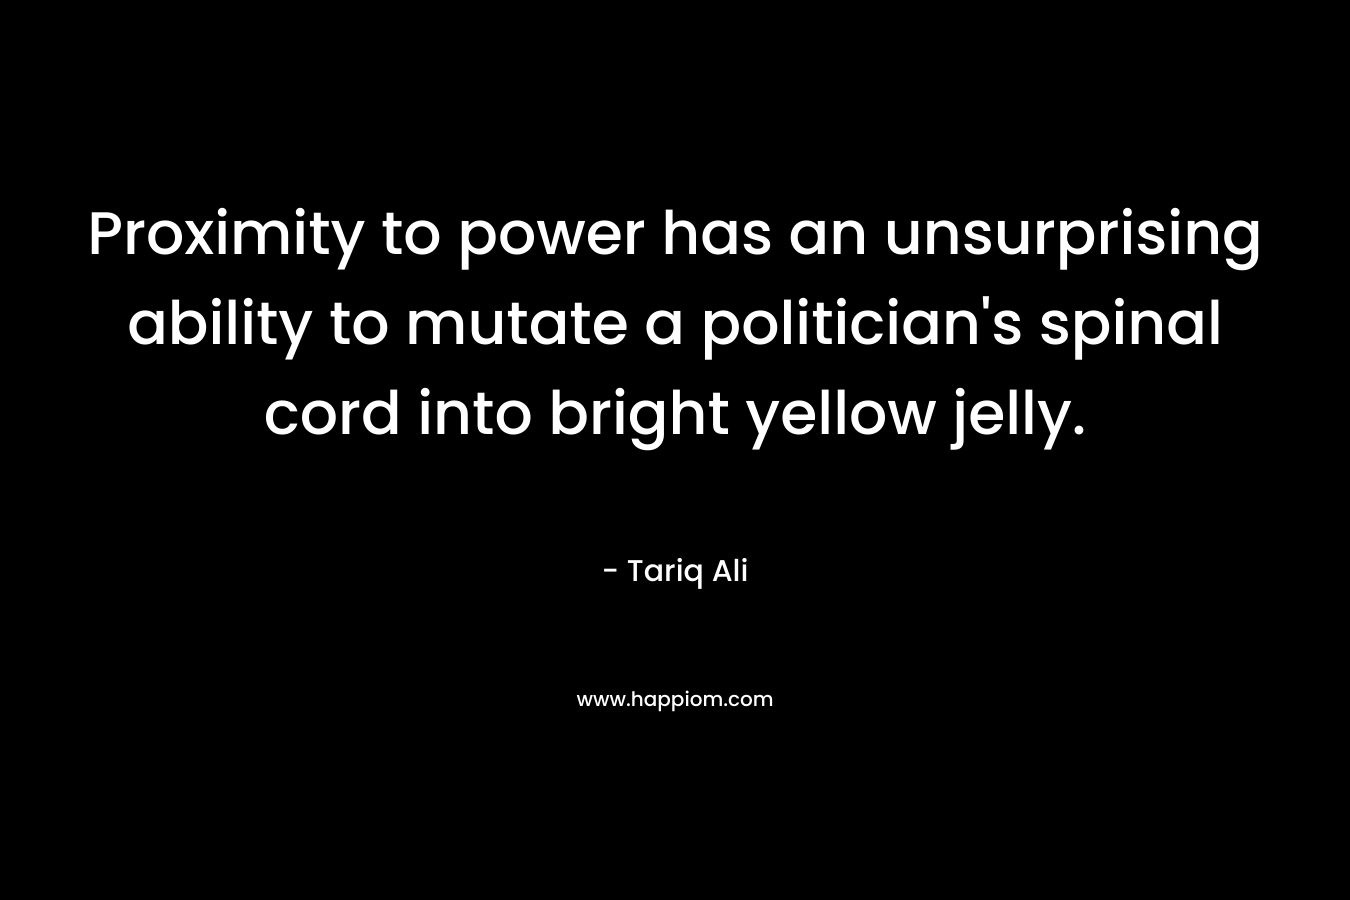 Proximity to power has an unsurprising ability to mutate a politician’s spinal cord into bright yellow jelly. – Tariq Ali